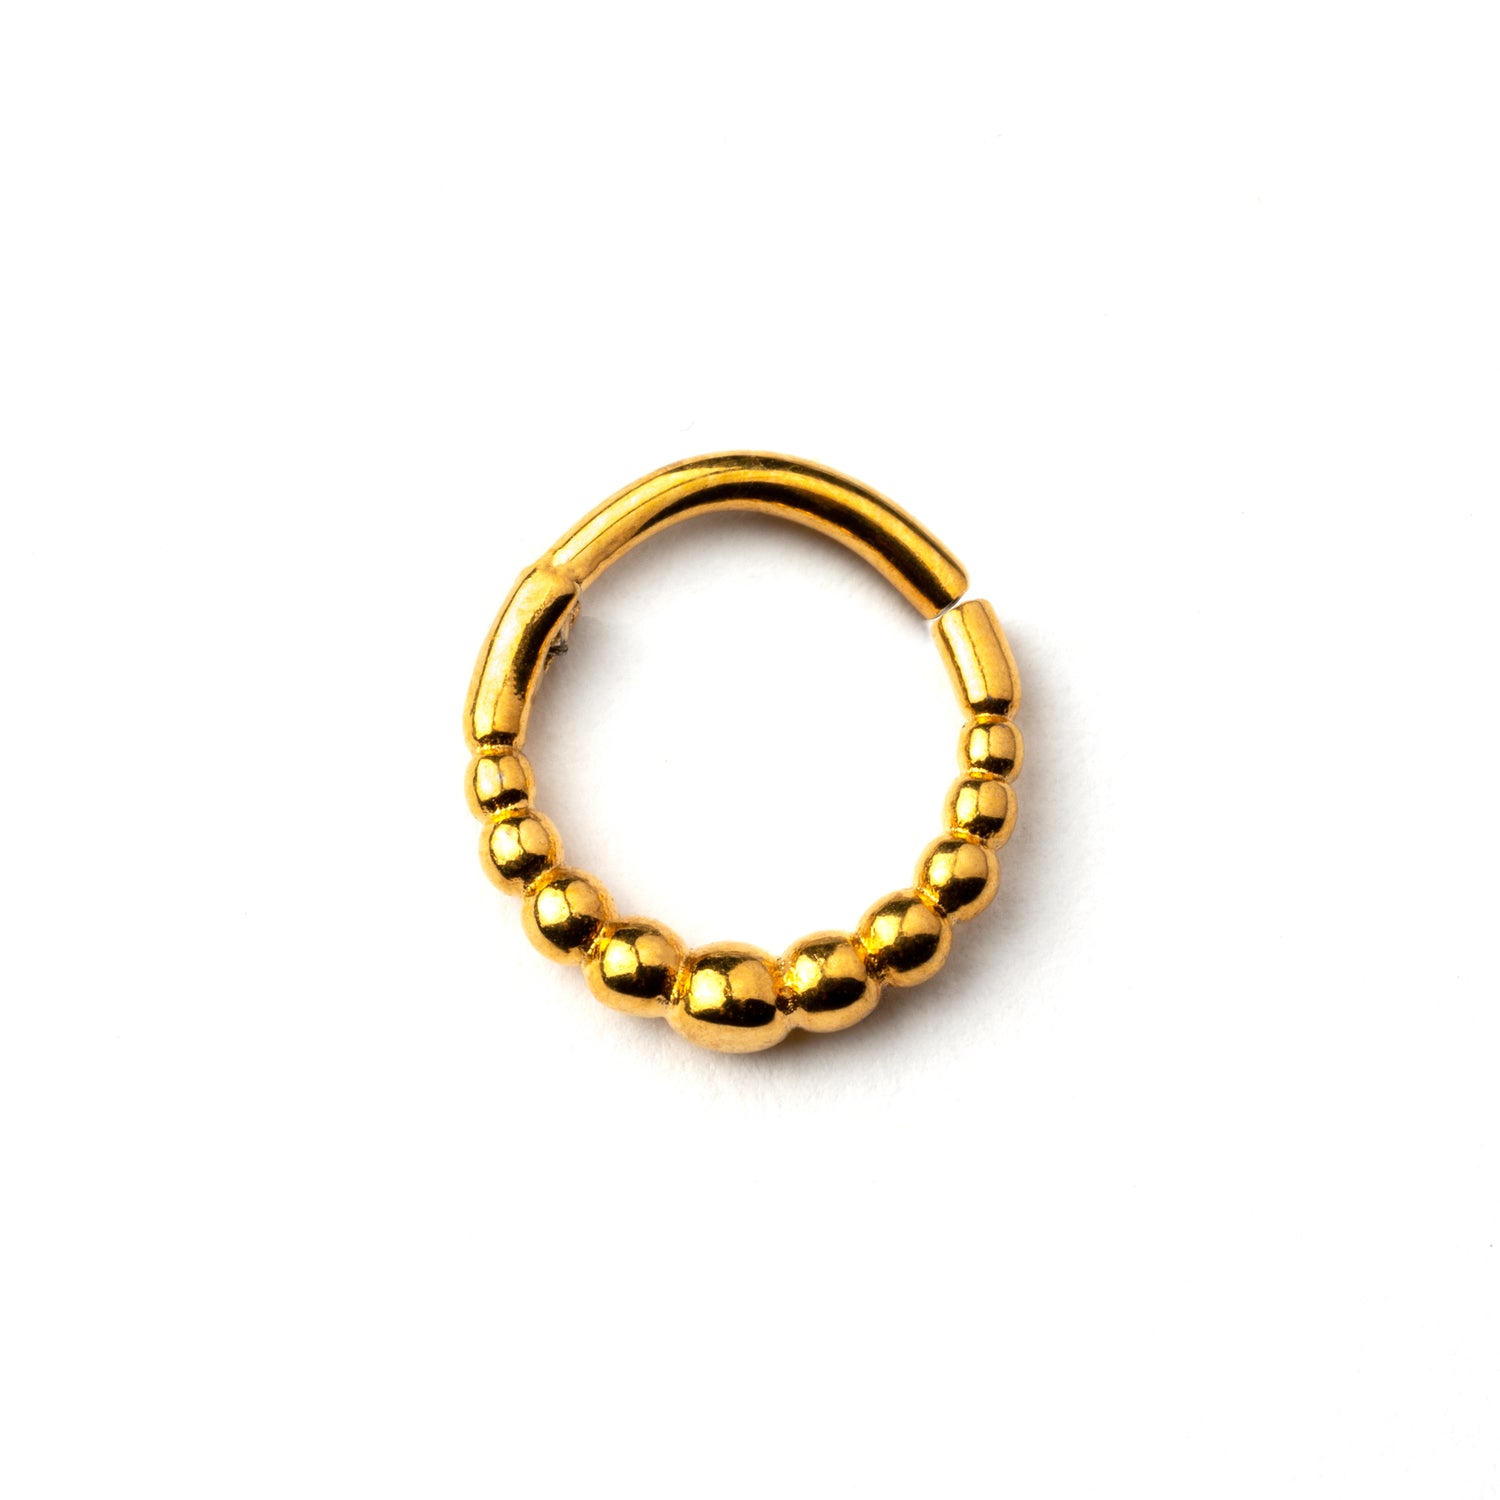 Golden surgical steel clicker piercing ring formed by tiny spheres frontal